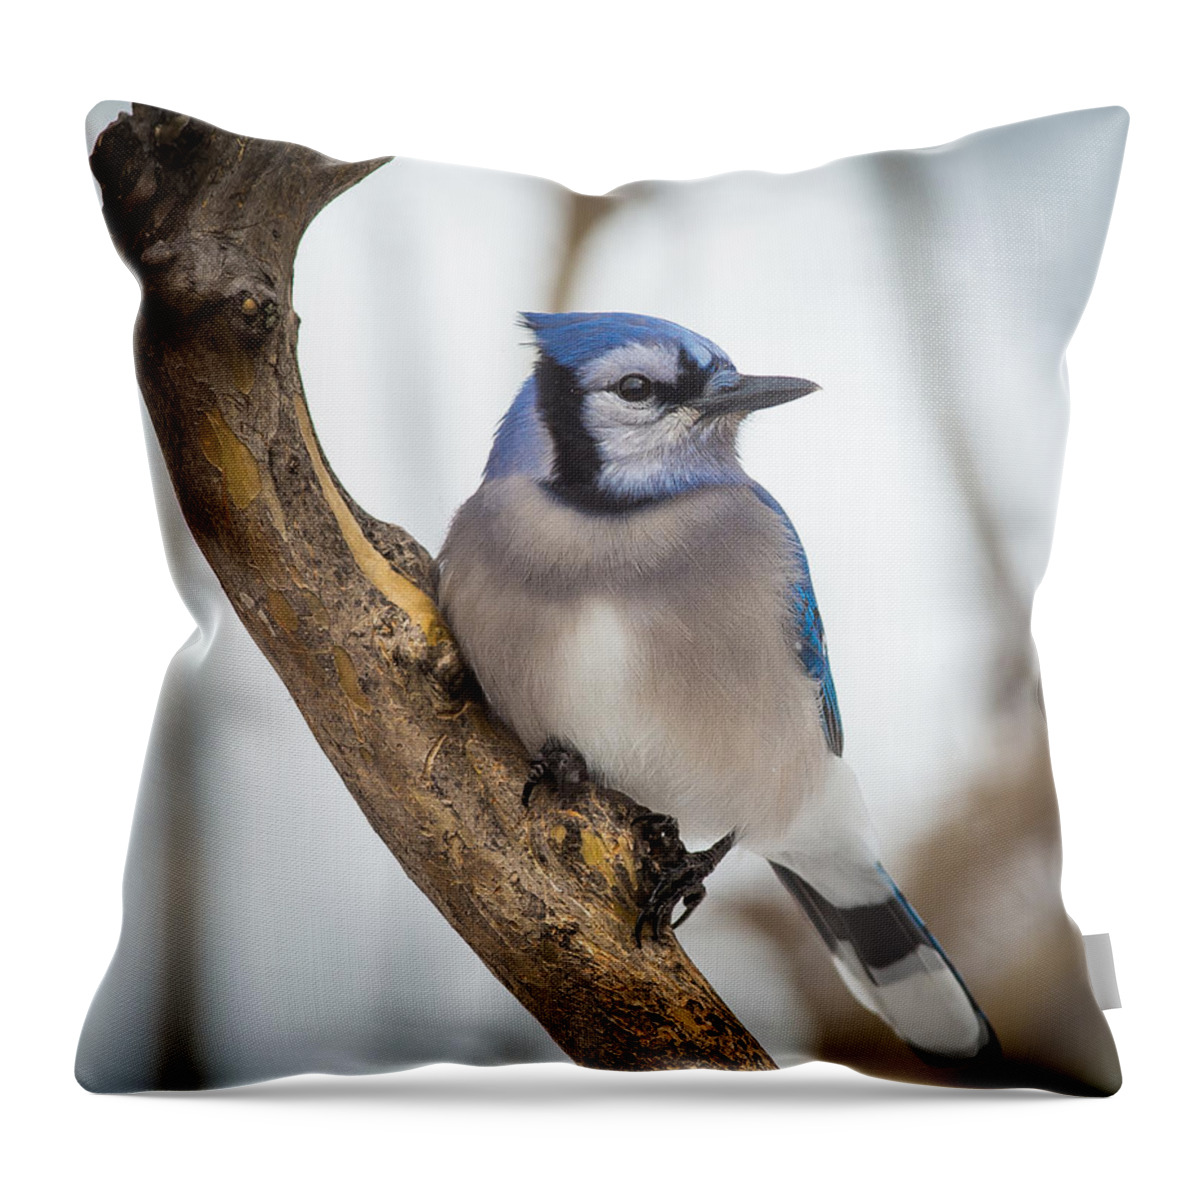 Blue Jay Throw Pillow featuring the photograph Cautious Blue Jay by David Downs